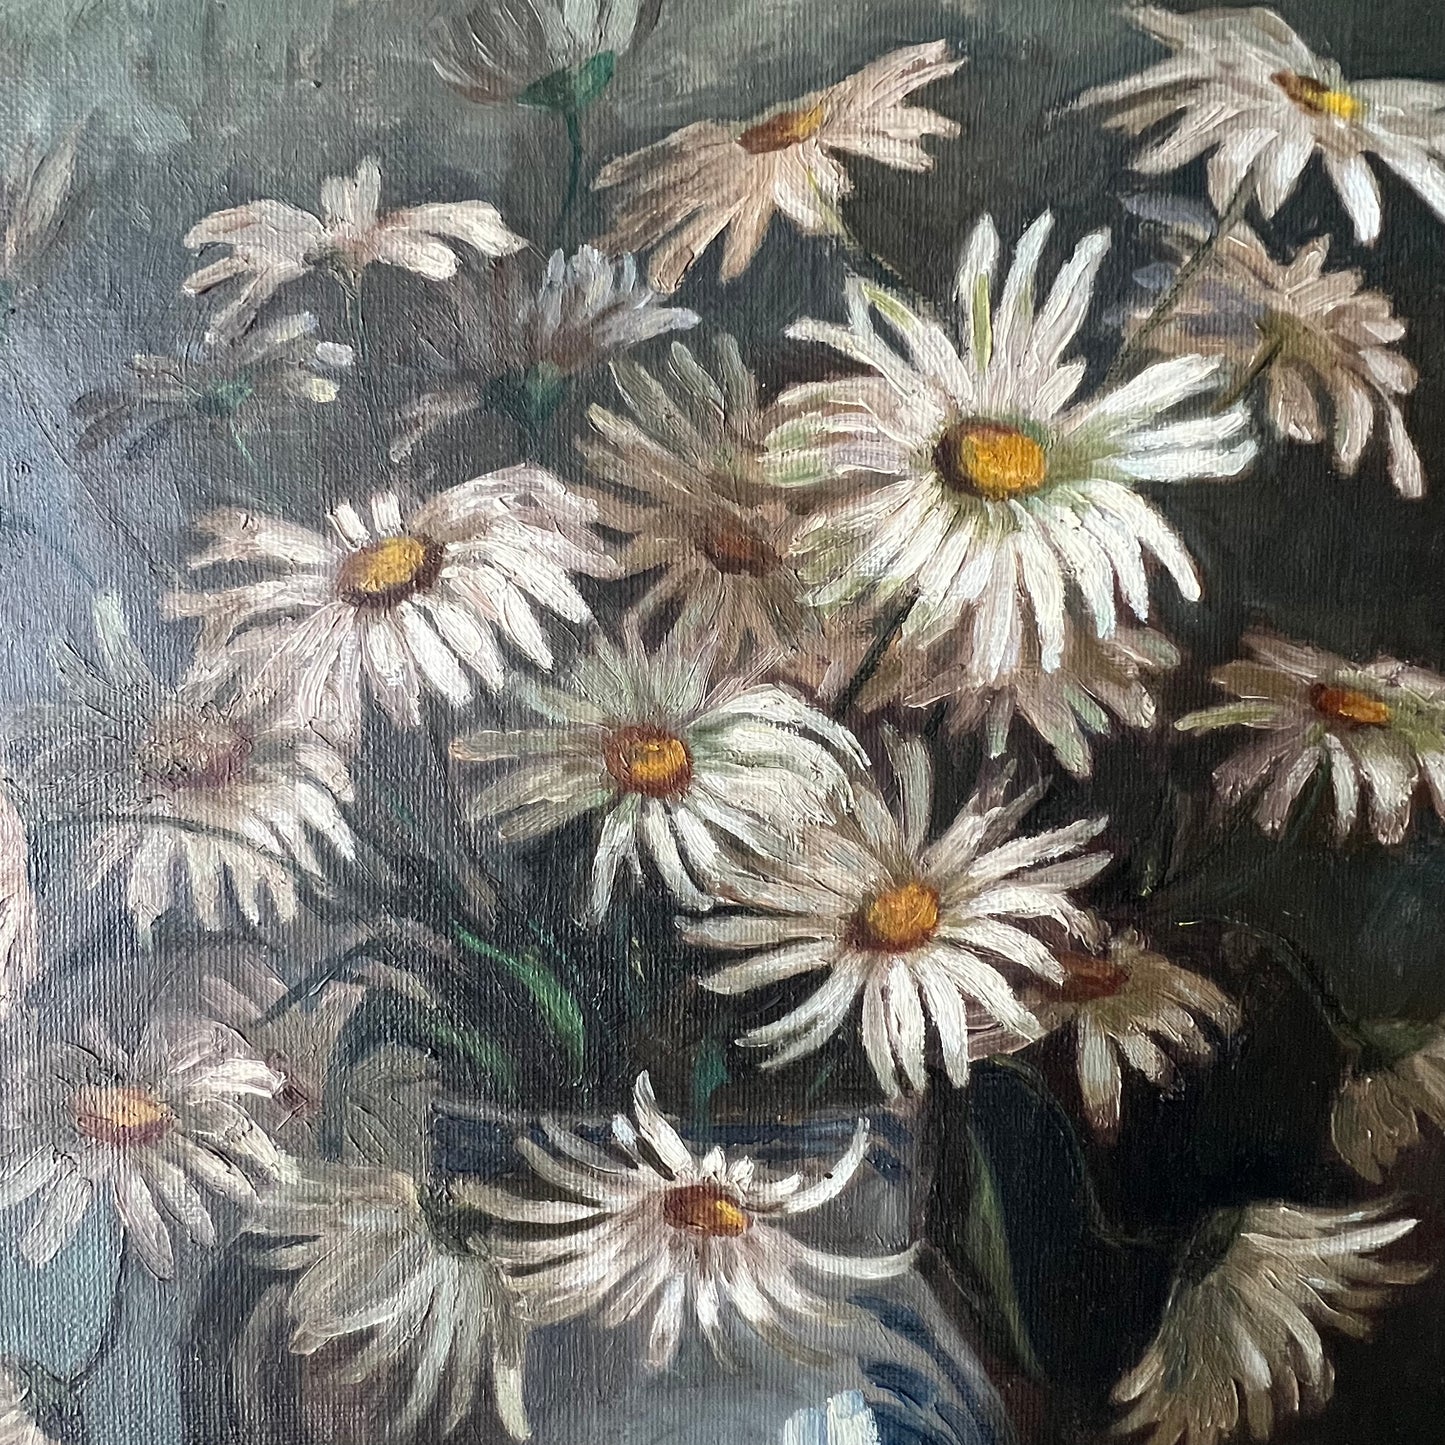 Vintage Oil Painting Still Life Daisies in Pottery Jug c1920s